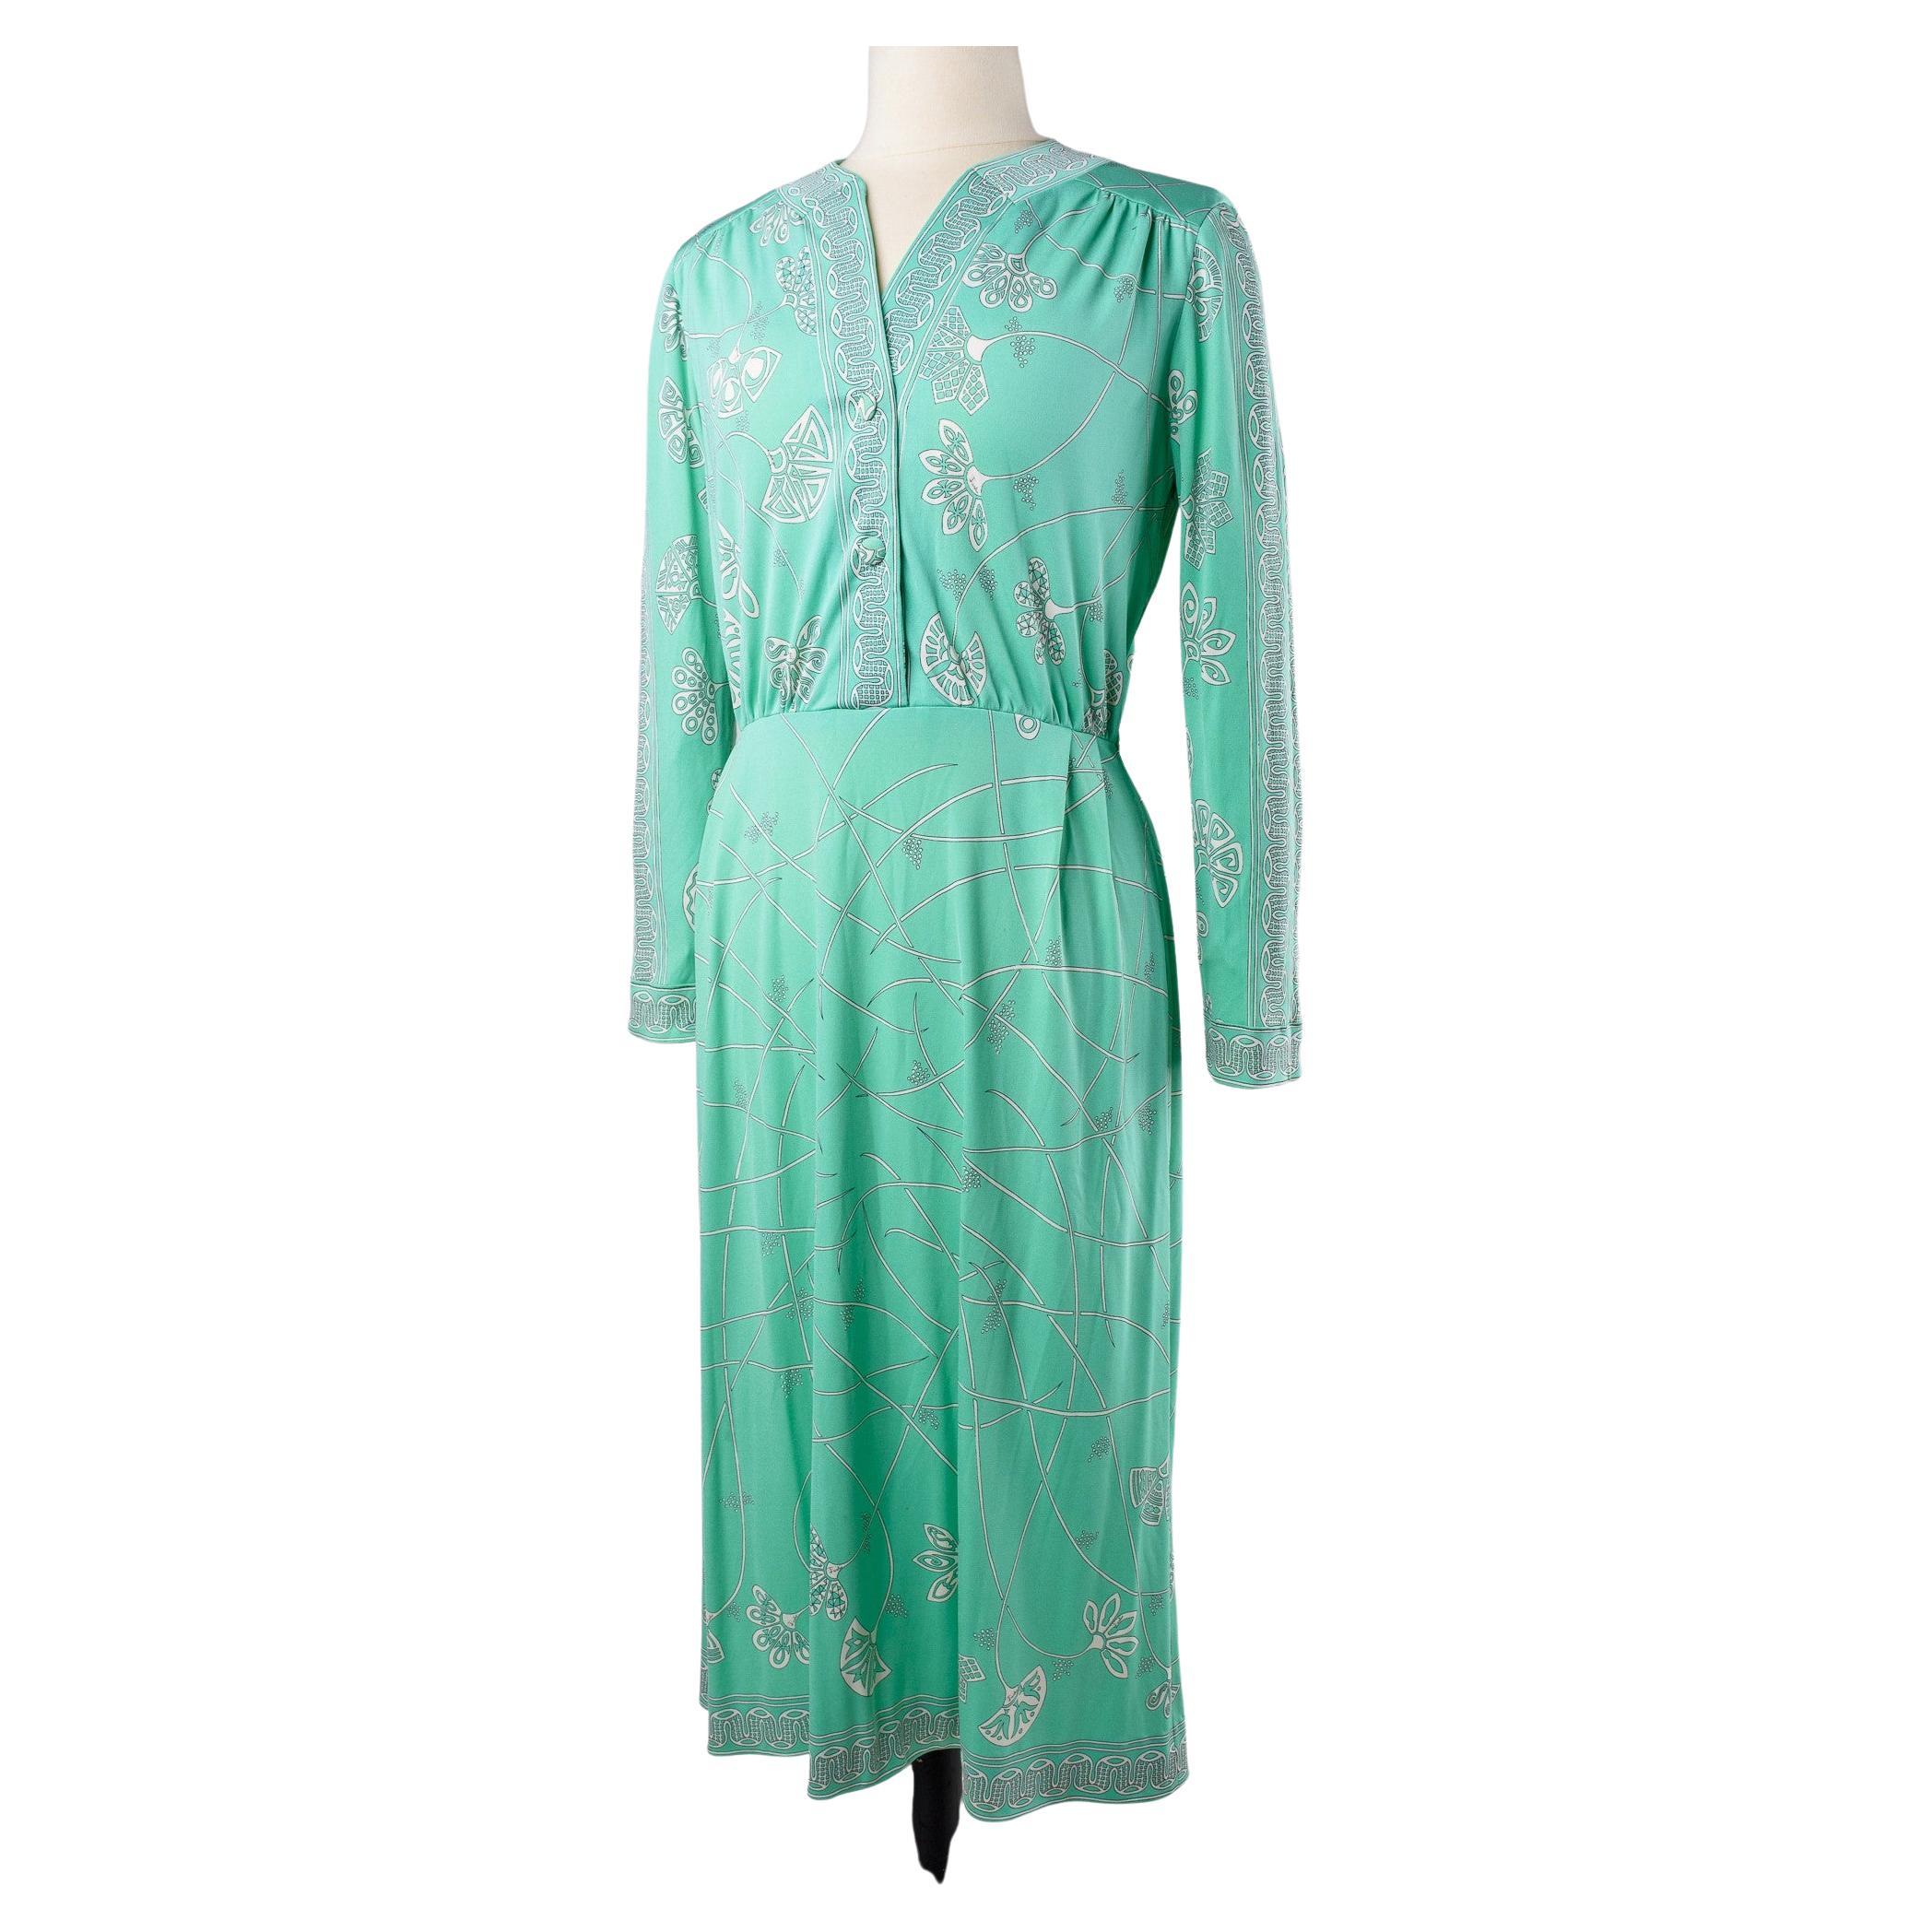 A light green printed silk jersey dress by Emilio Pucci - Italy Circa 1980 For Sale